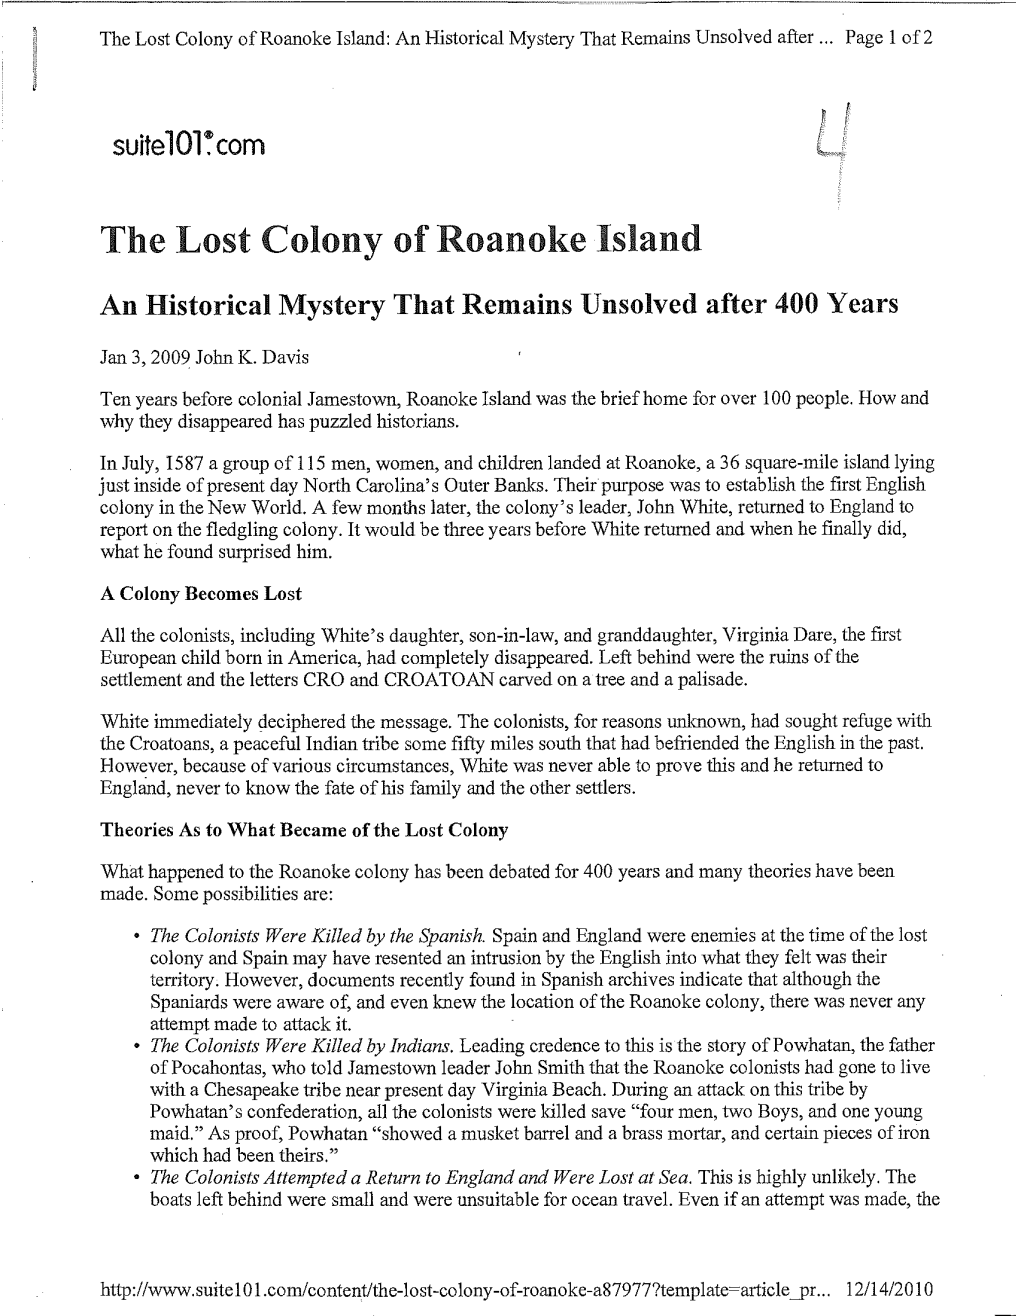 The Lost Colony of Roanoke L[Sland an Historical Mystery That Remains Unsolved After 400 Years